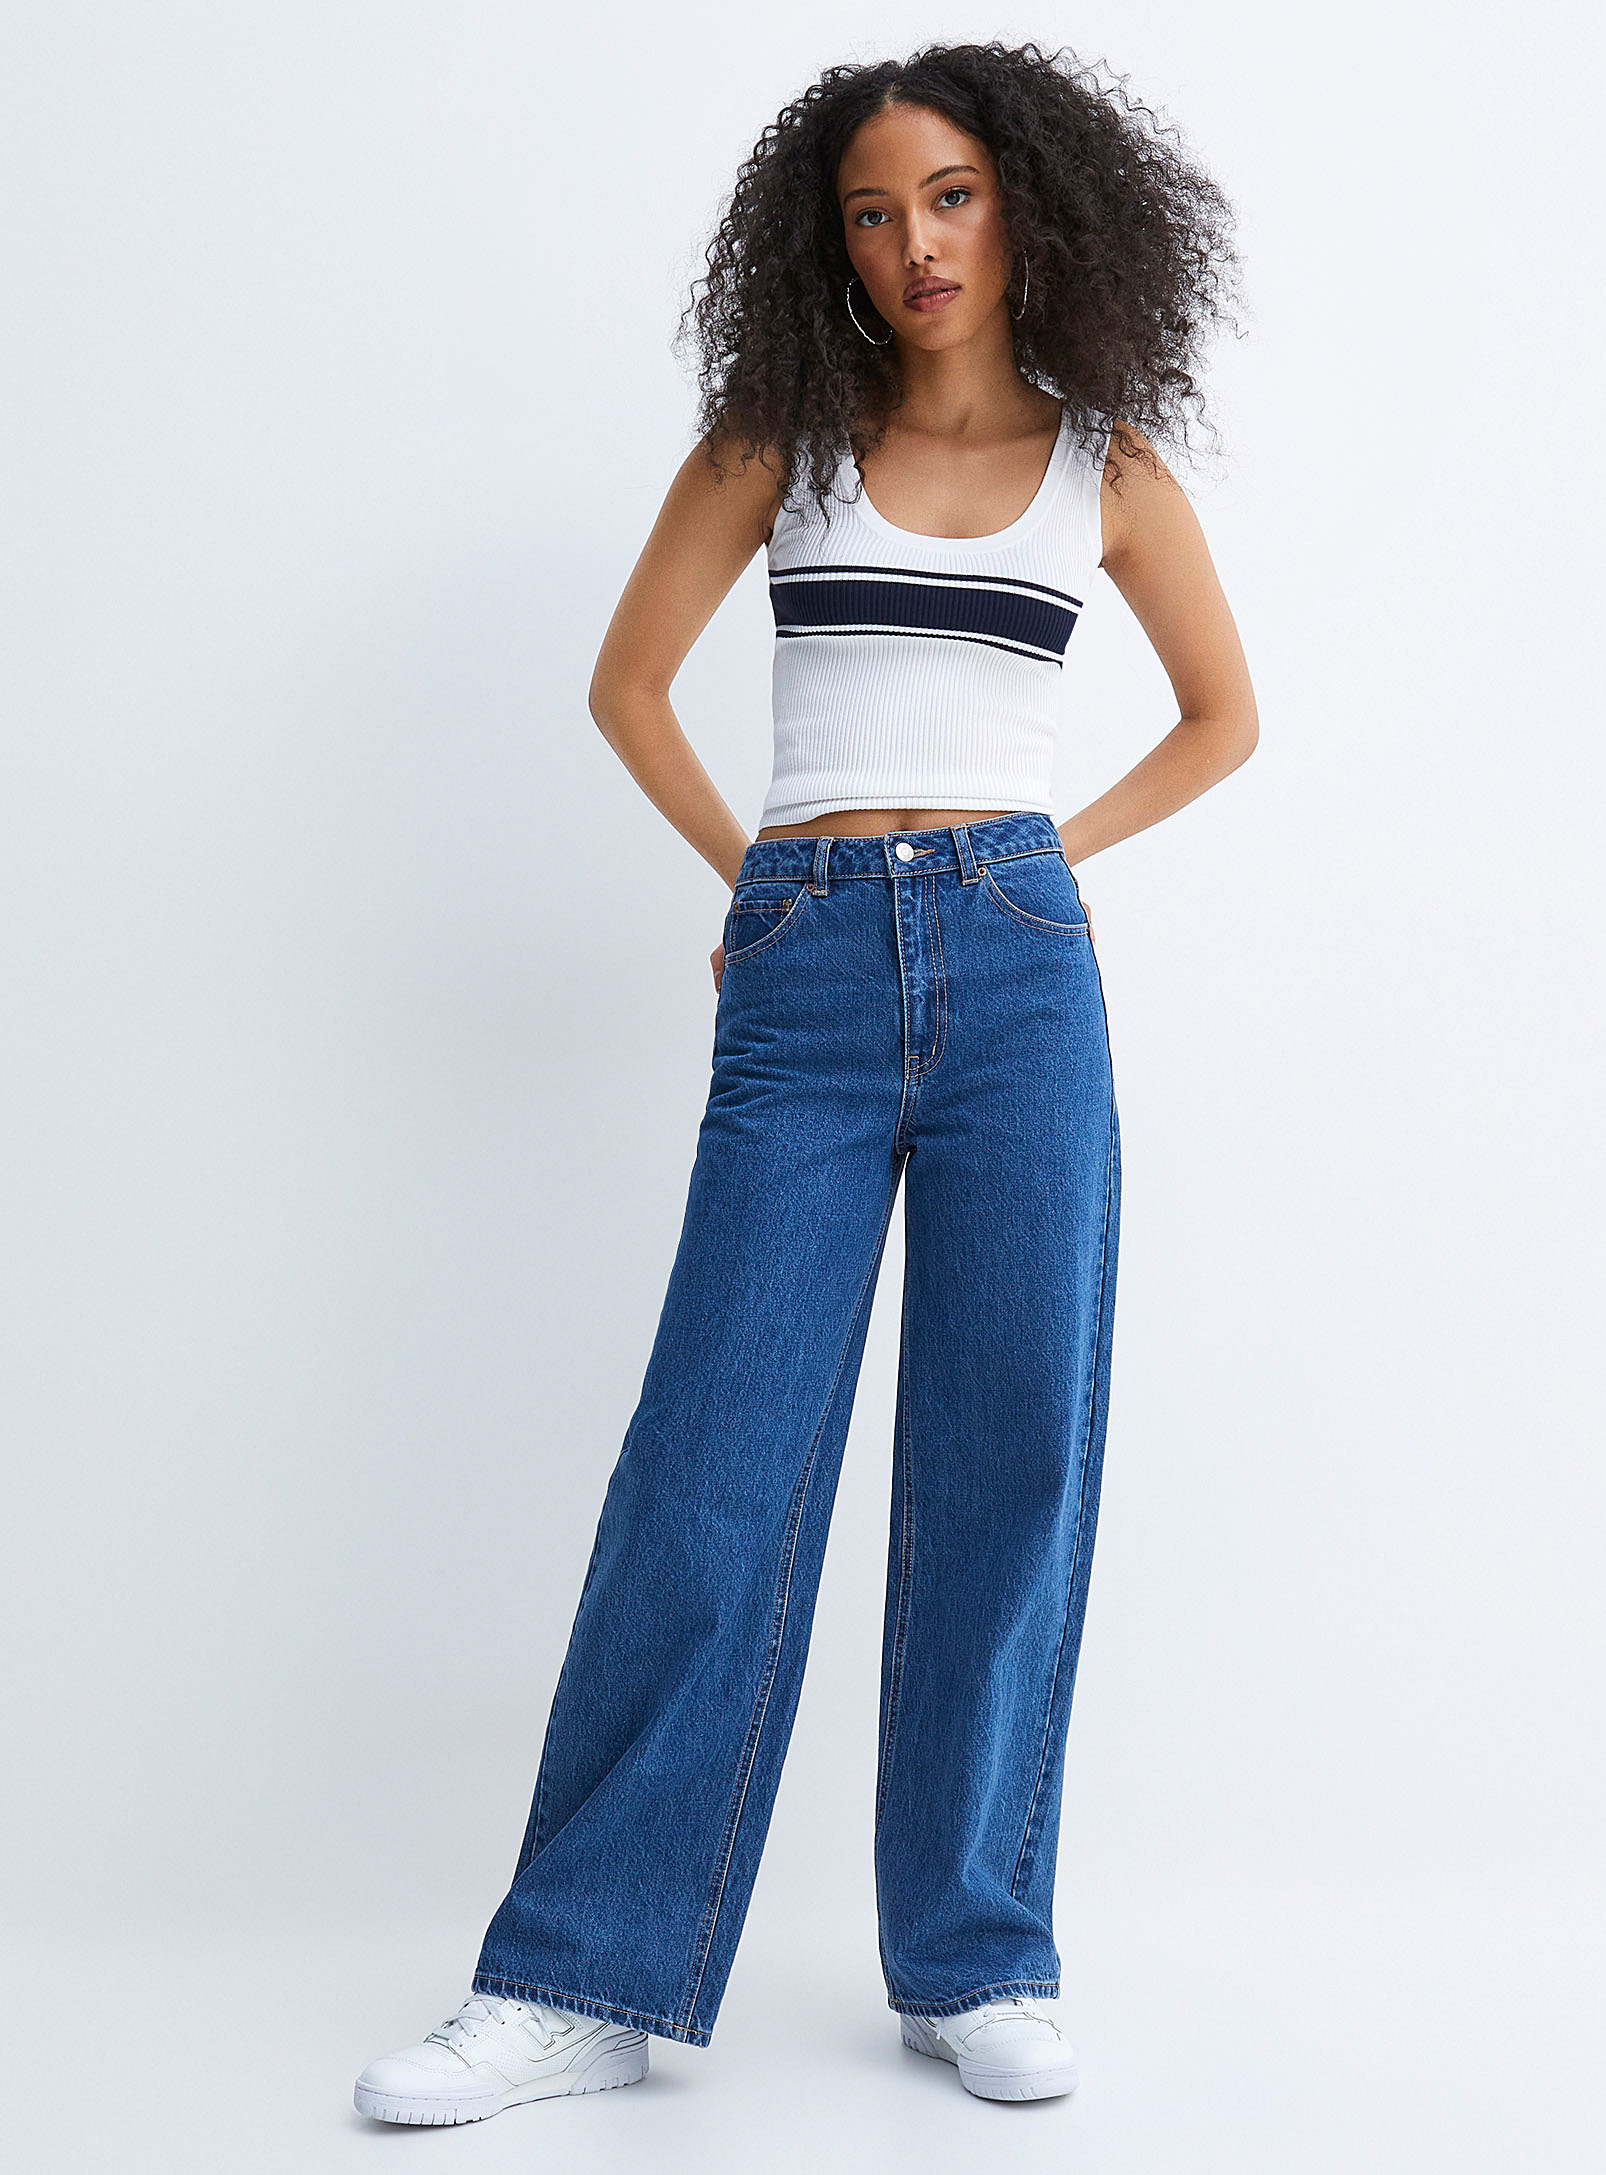 Twik Recycled Cotton Extra-wide-leg Jean Rb Fit In Sapphire Blue